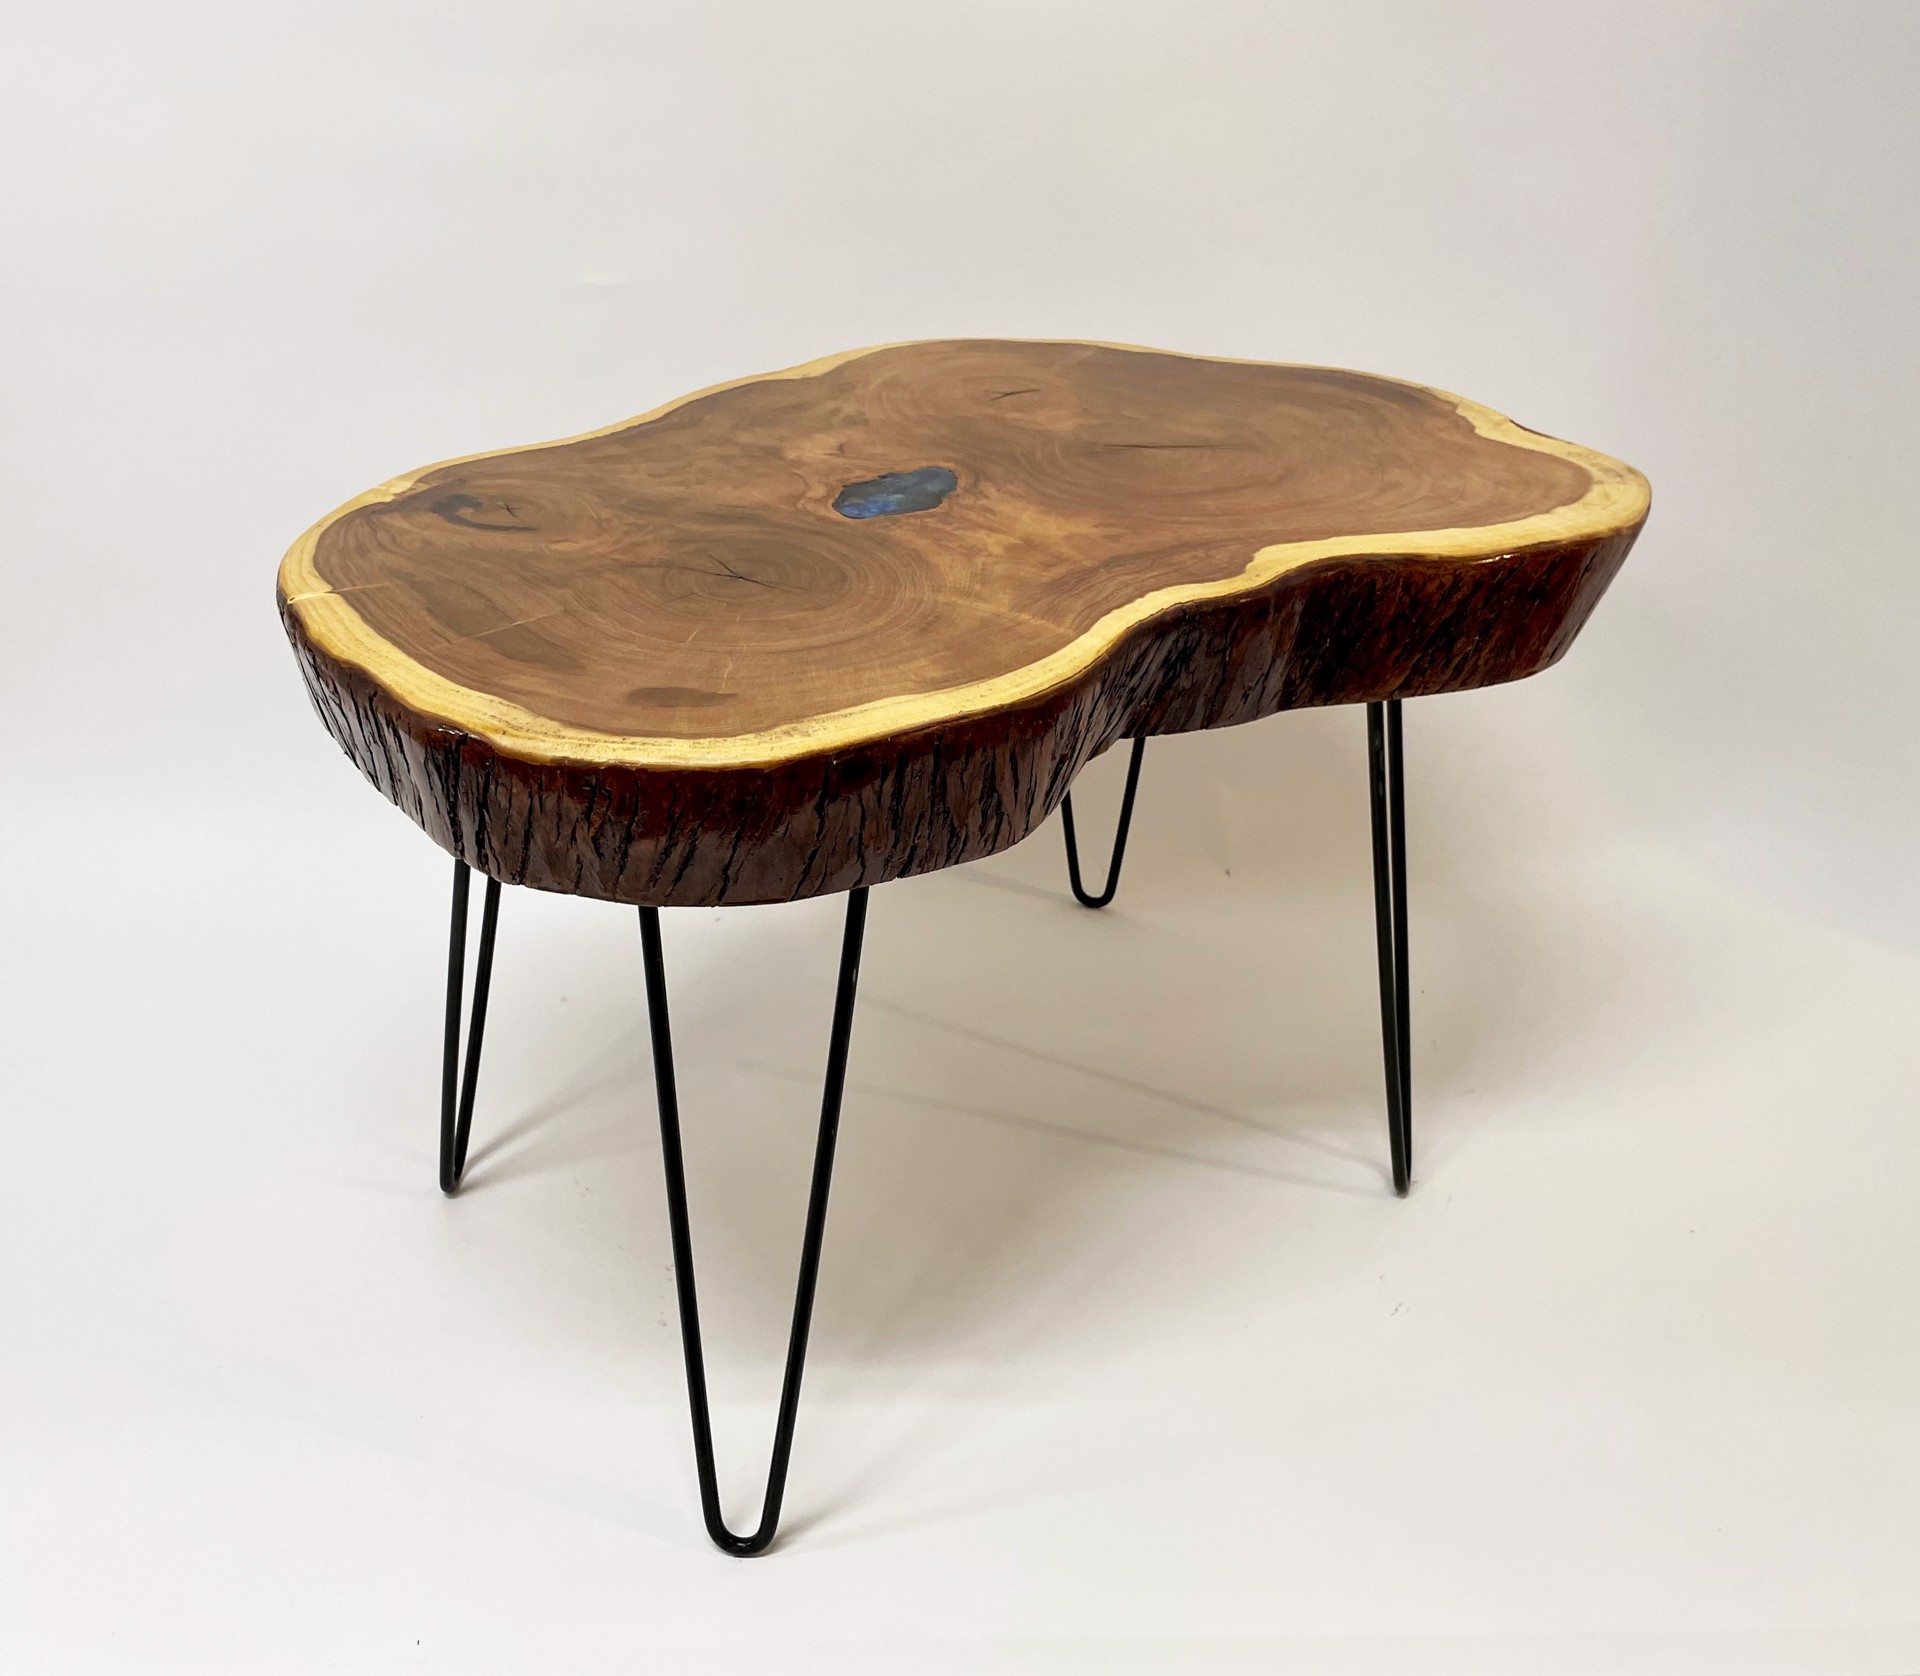 Small Slab Mesquite & Blue Resin Spindle Leg Table by Kirk Allan